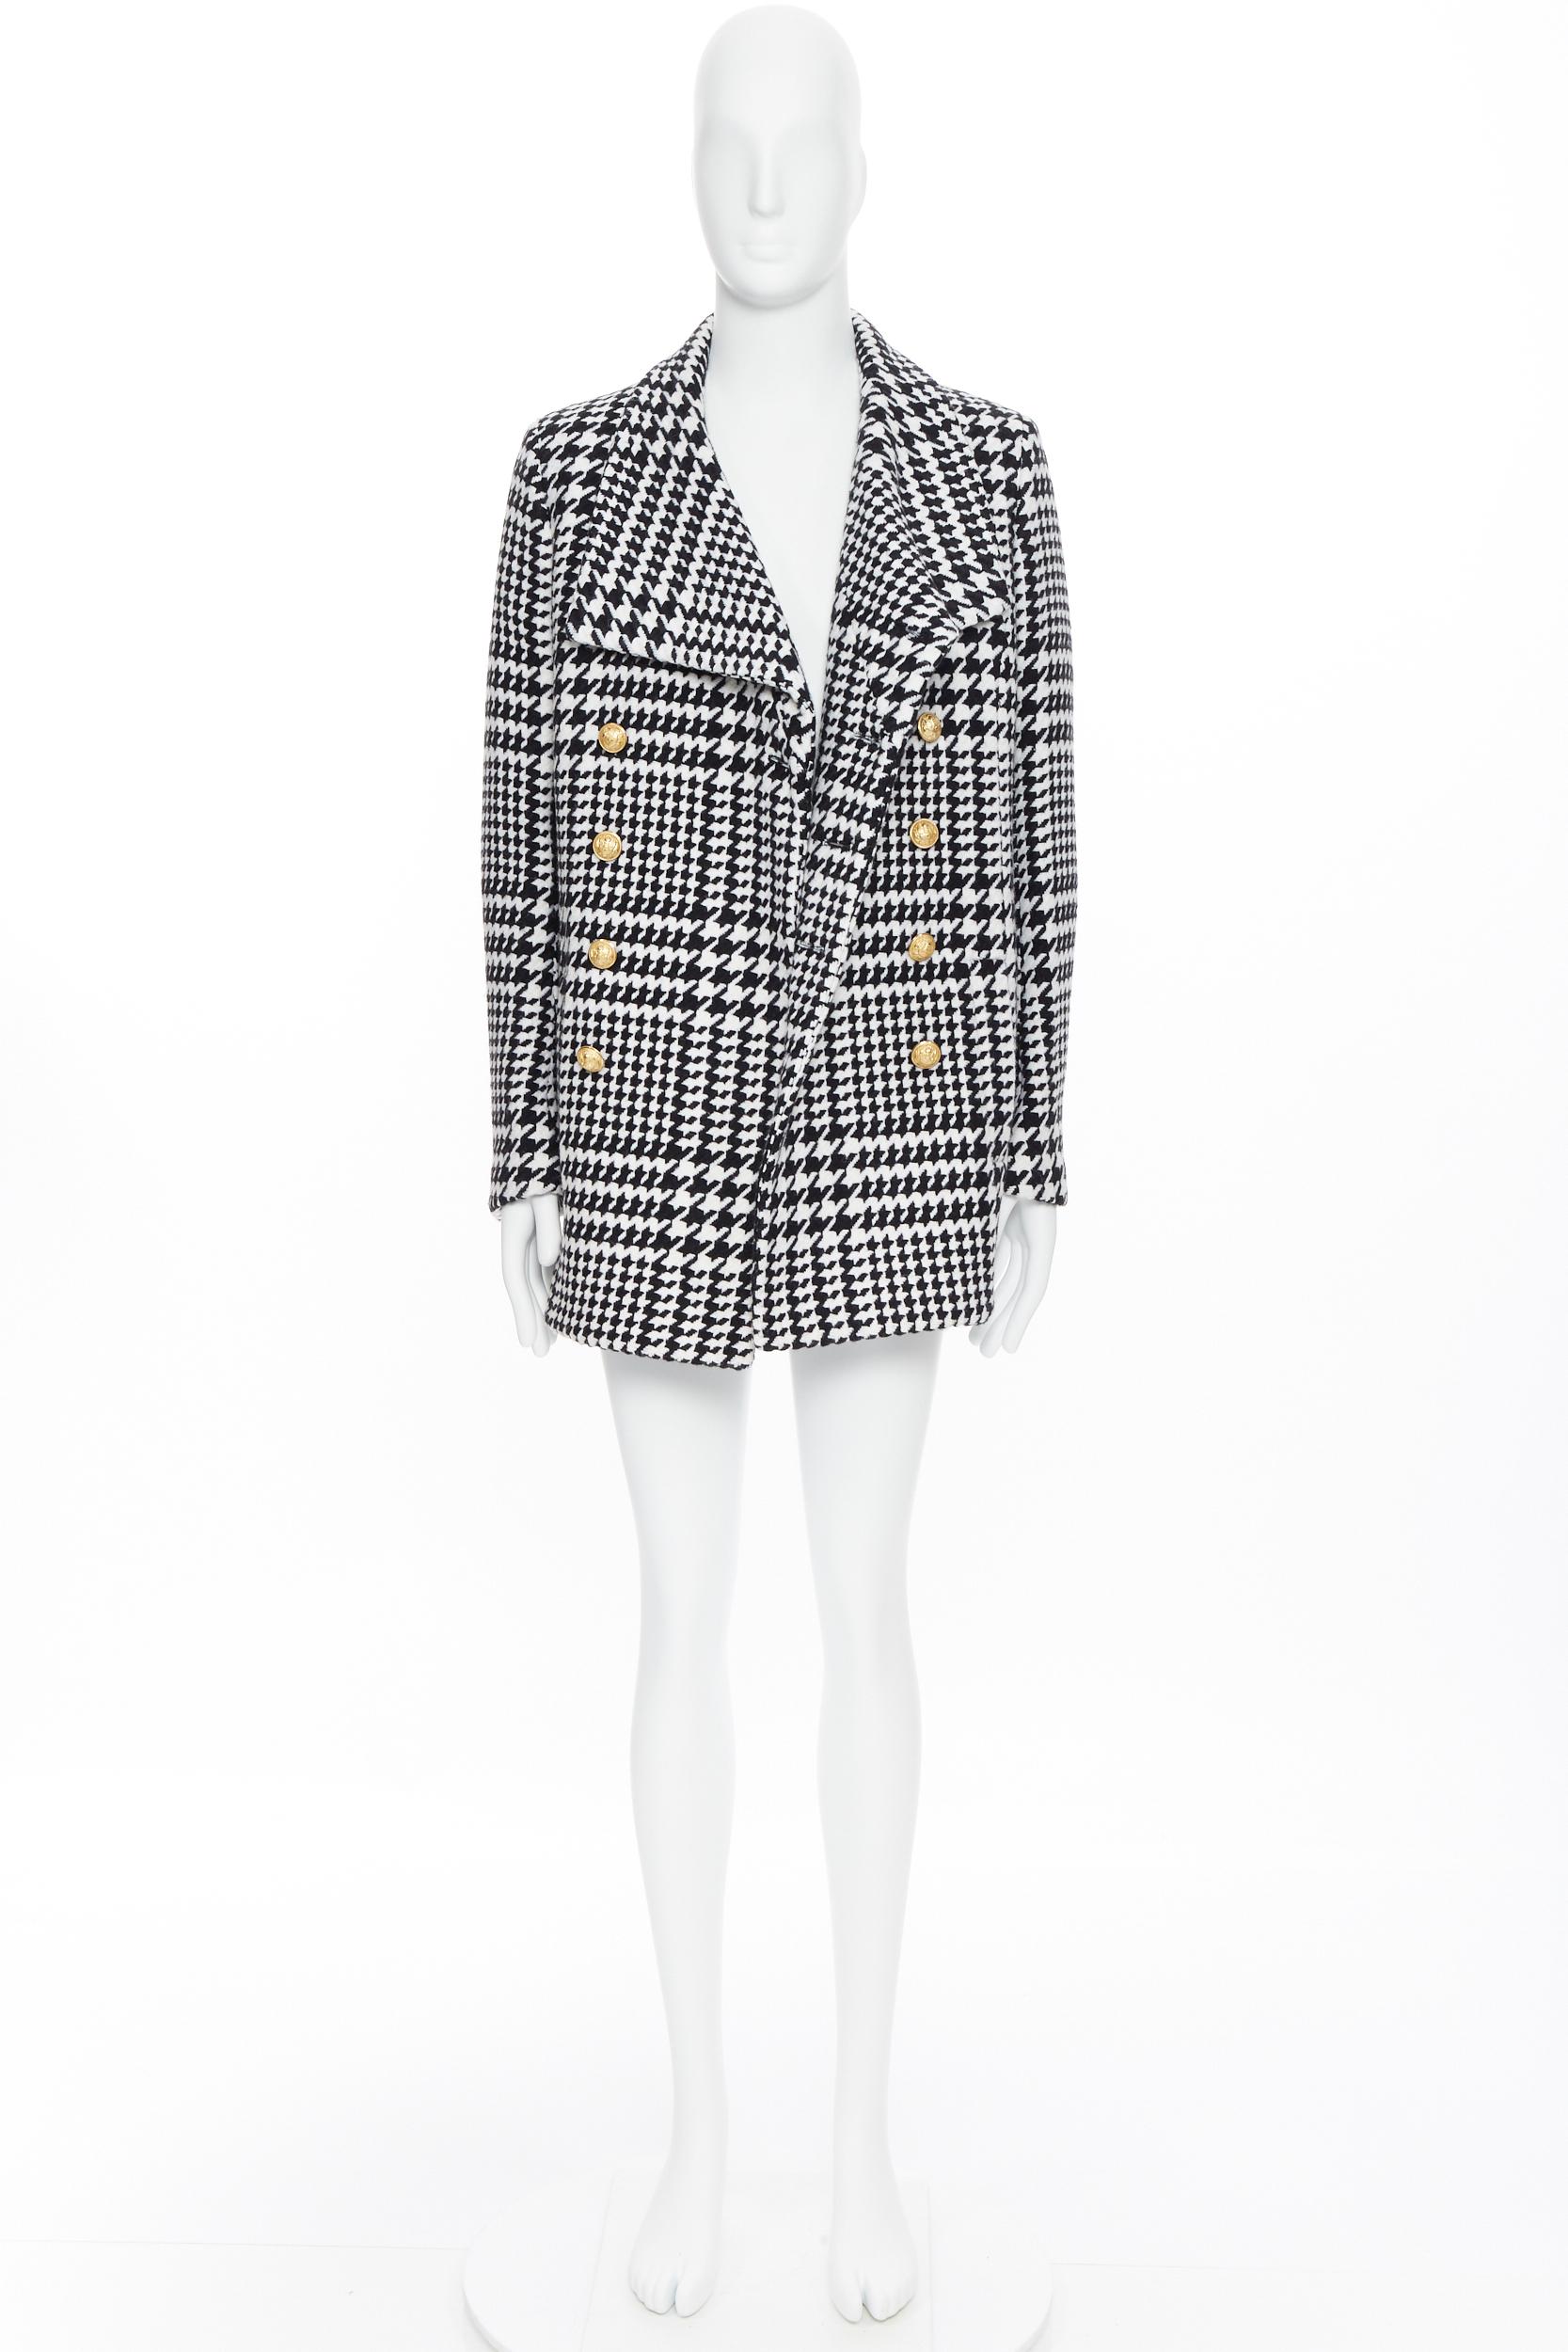 Gray new BALMAIN black white houndstooth gold double breasted military wool coat EU48